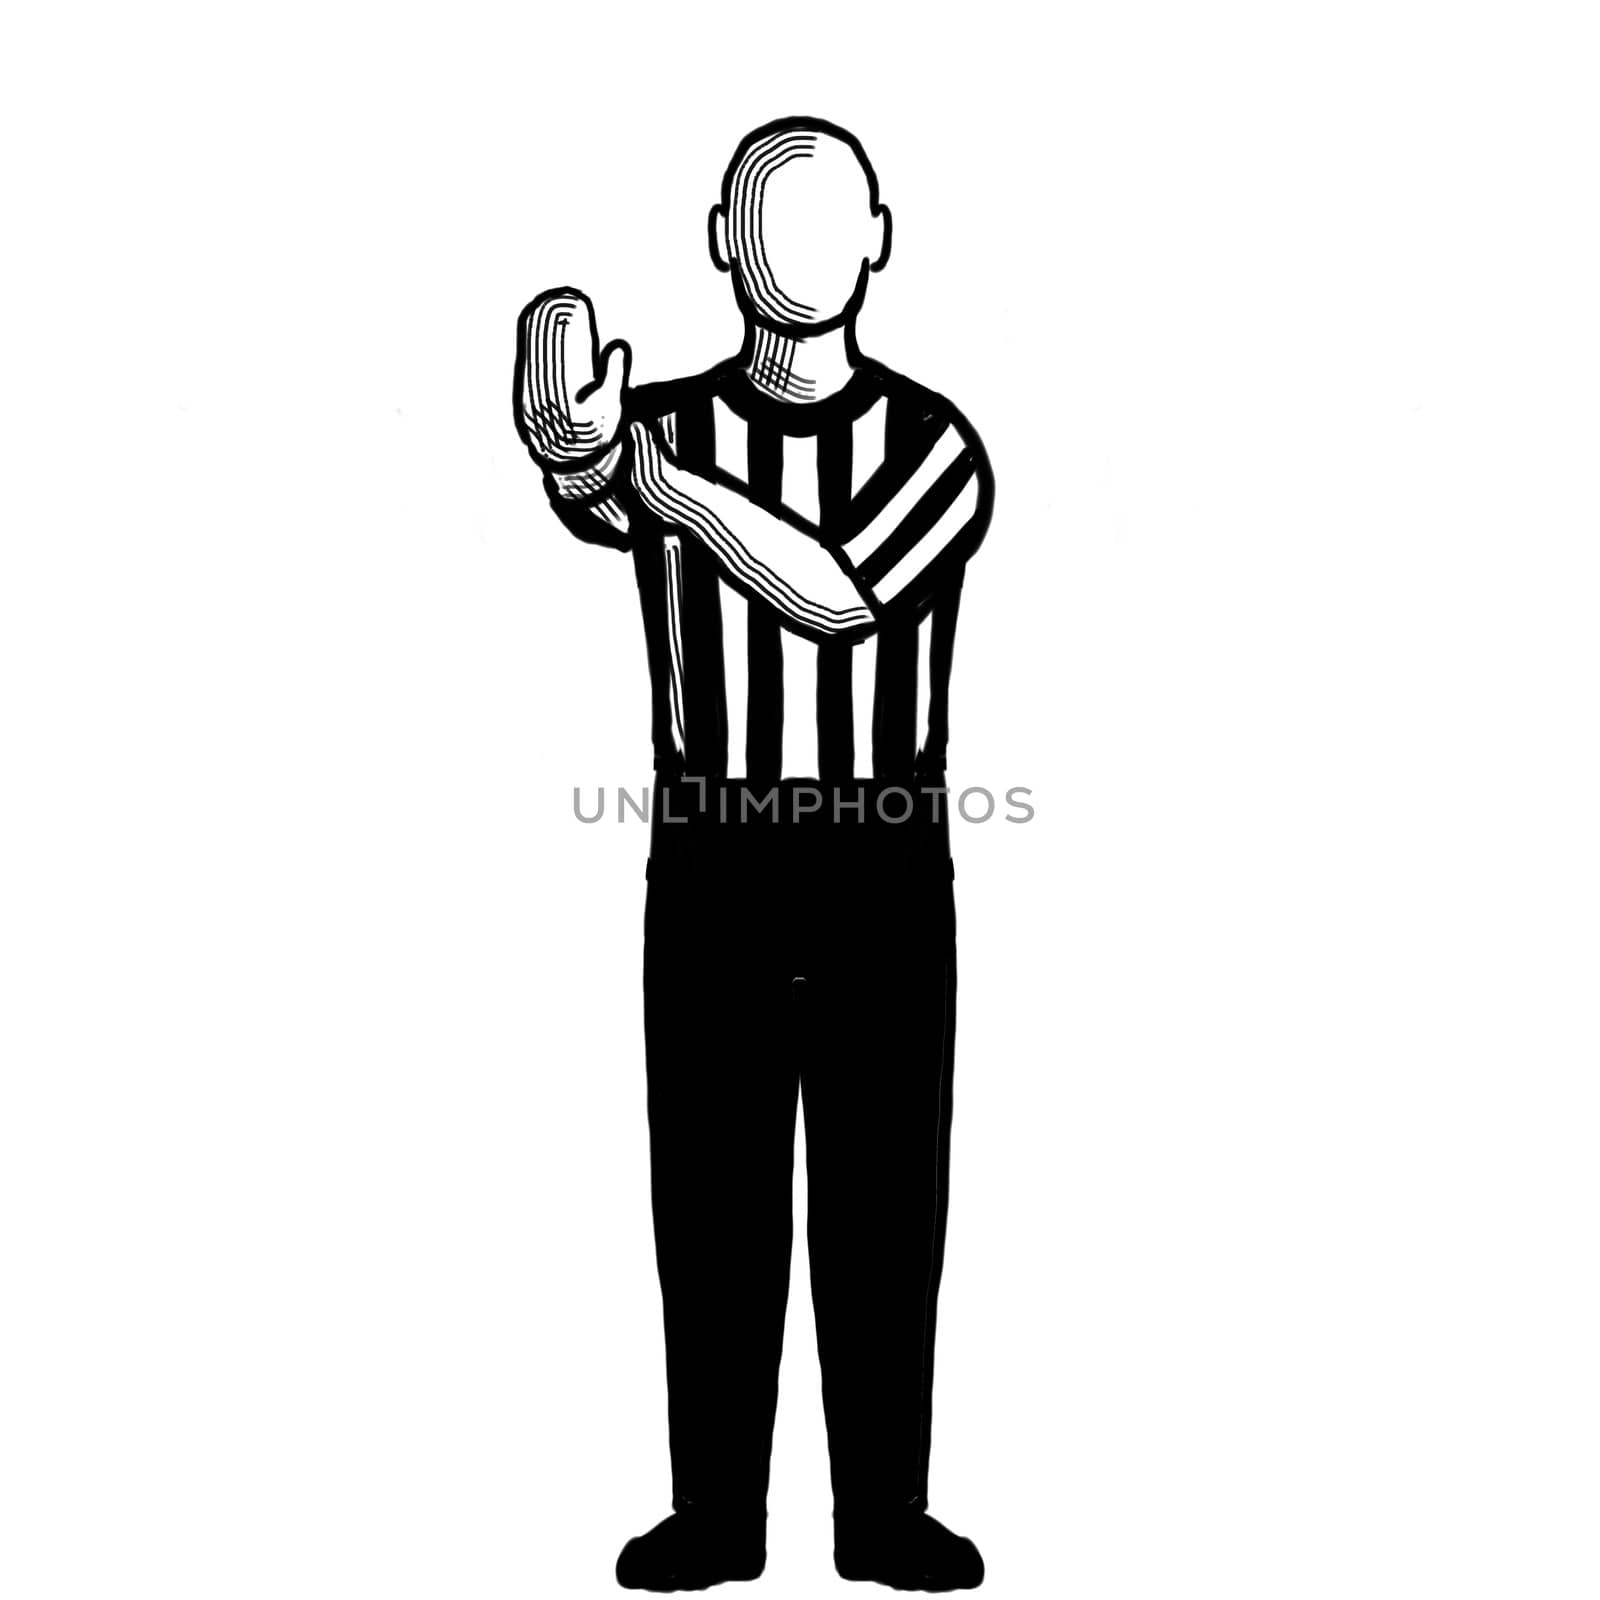 Black and white illustration of a basketball referee or official with hand signal showing hand check viewed from front on isolated background done retro style.